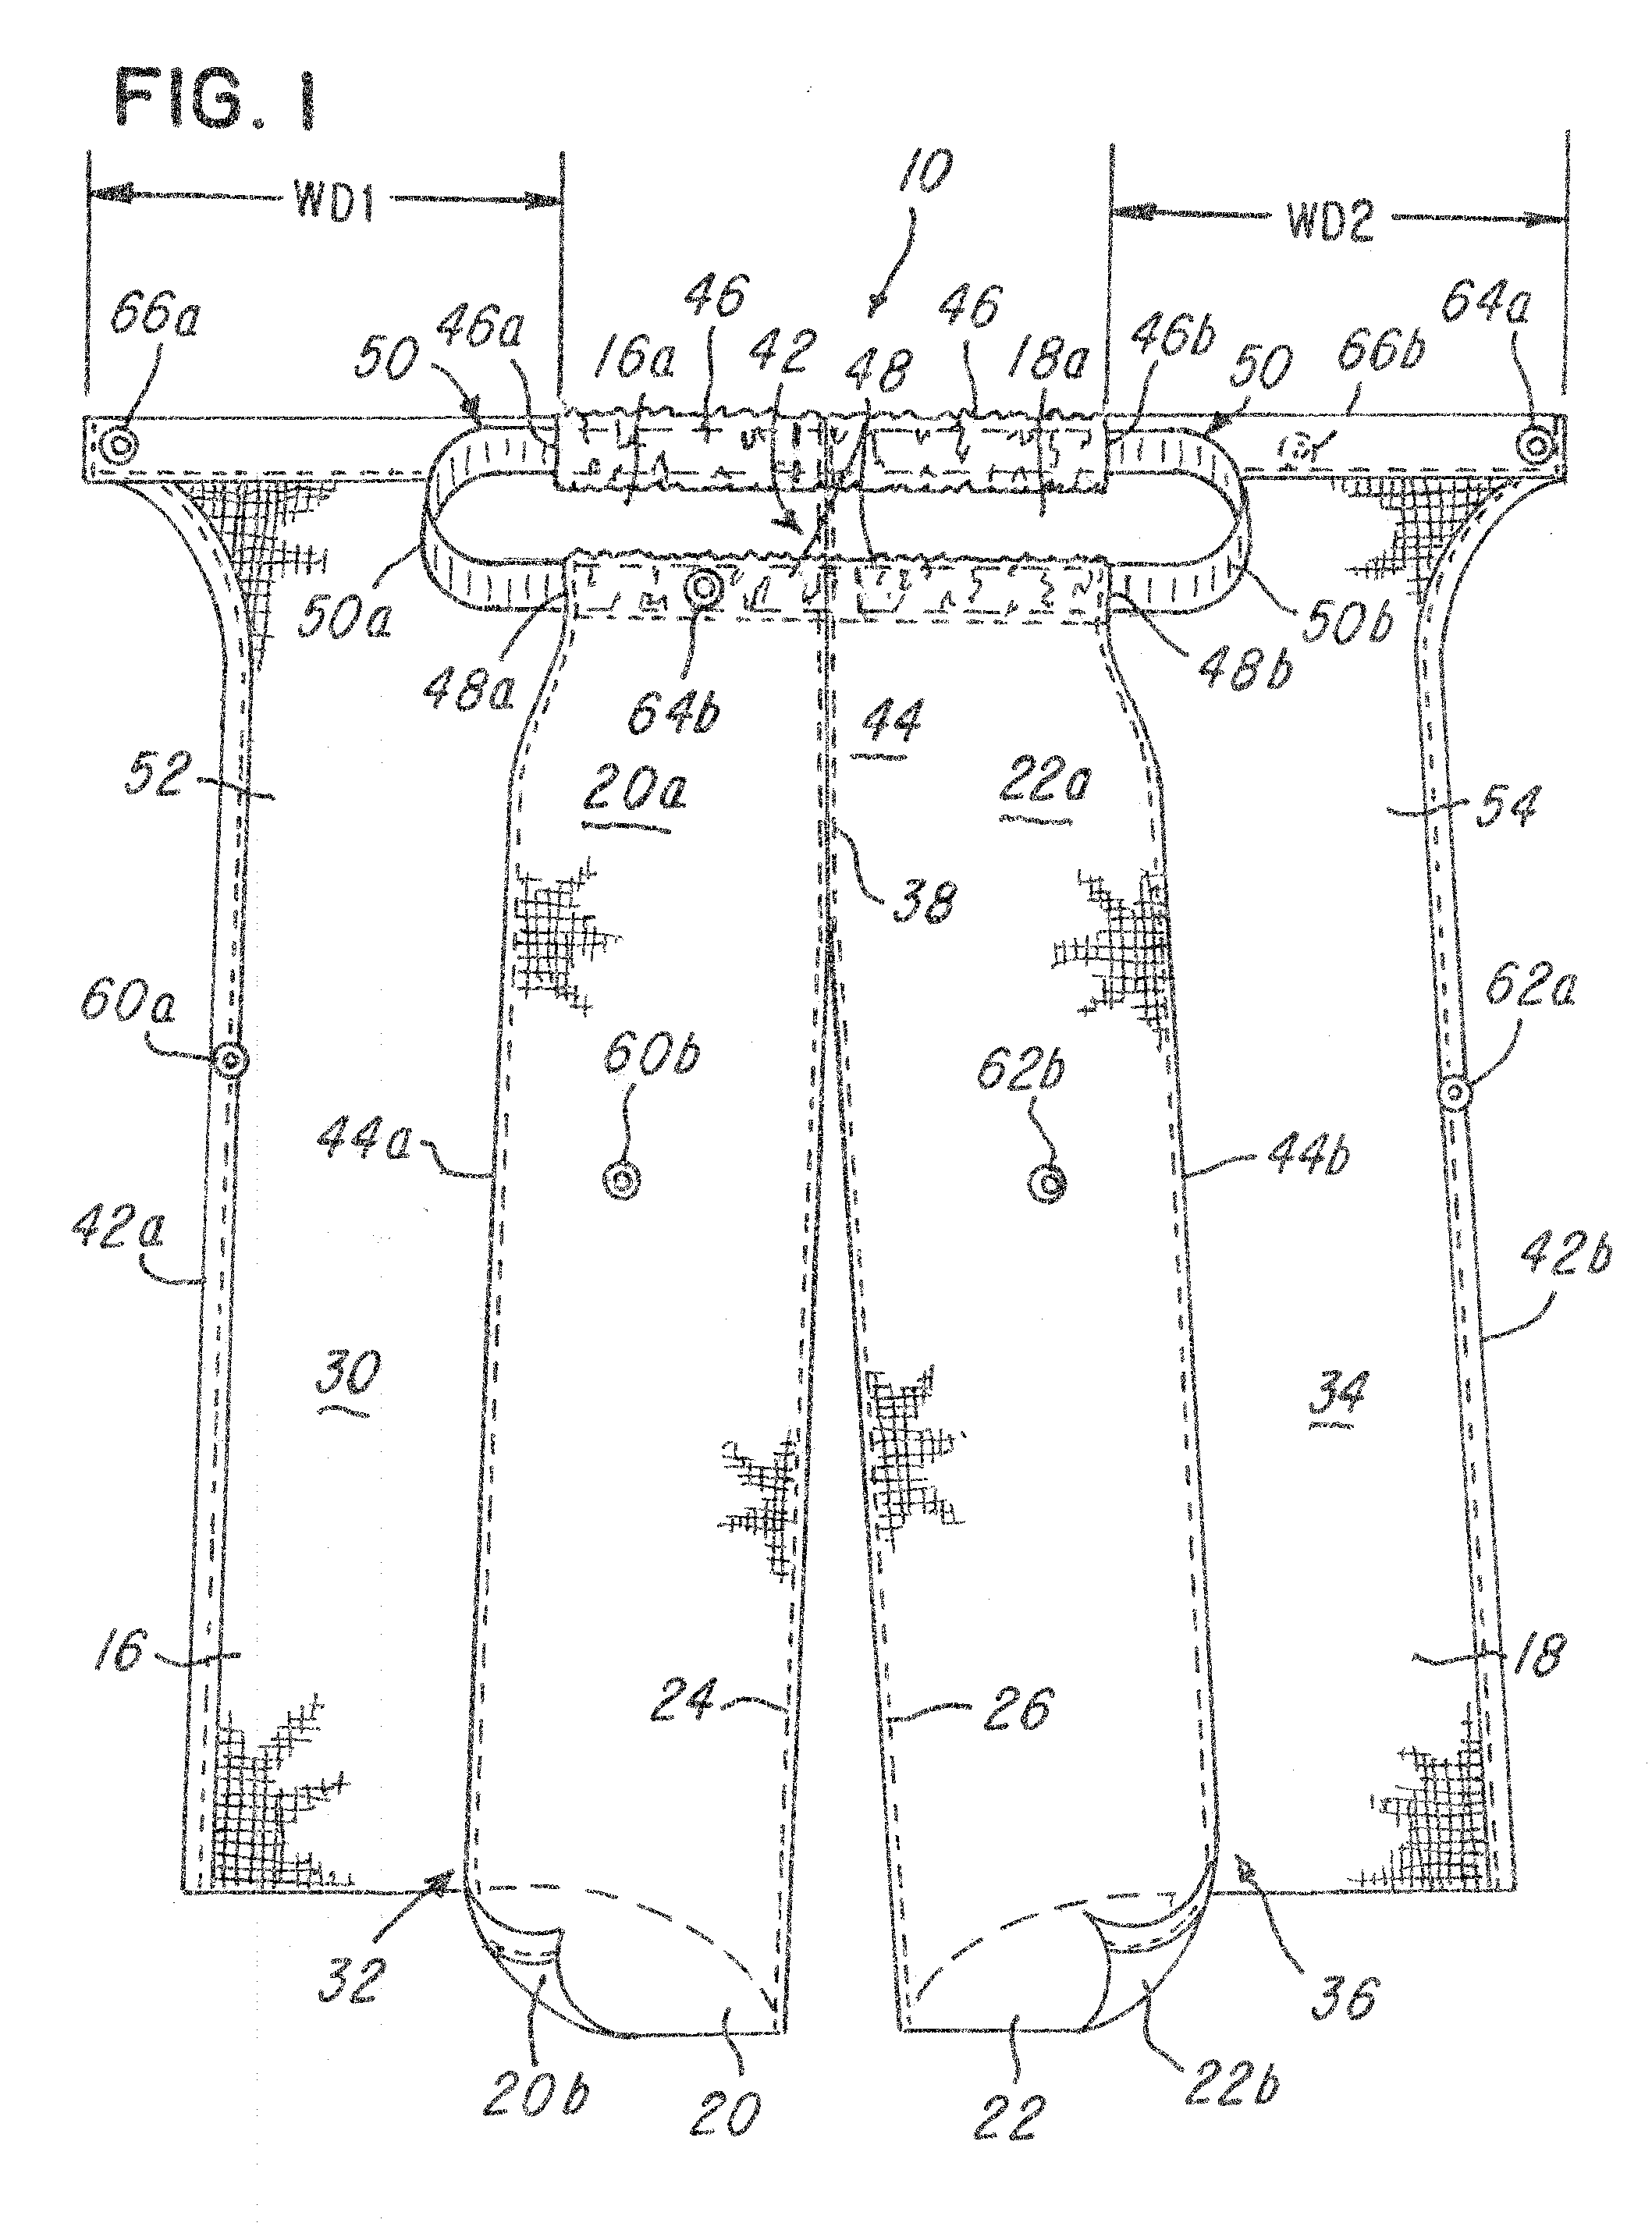 Pair of pants and method for donning and removing a pair of pants